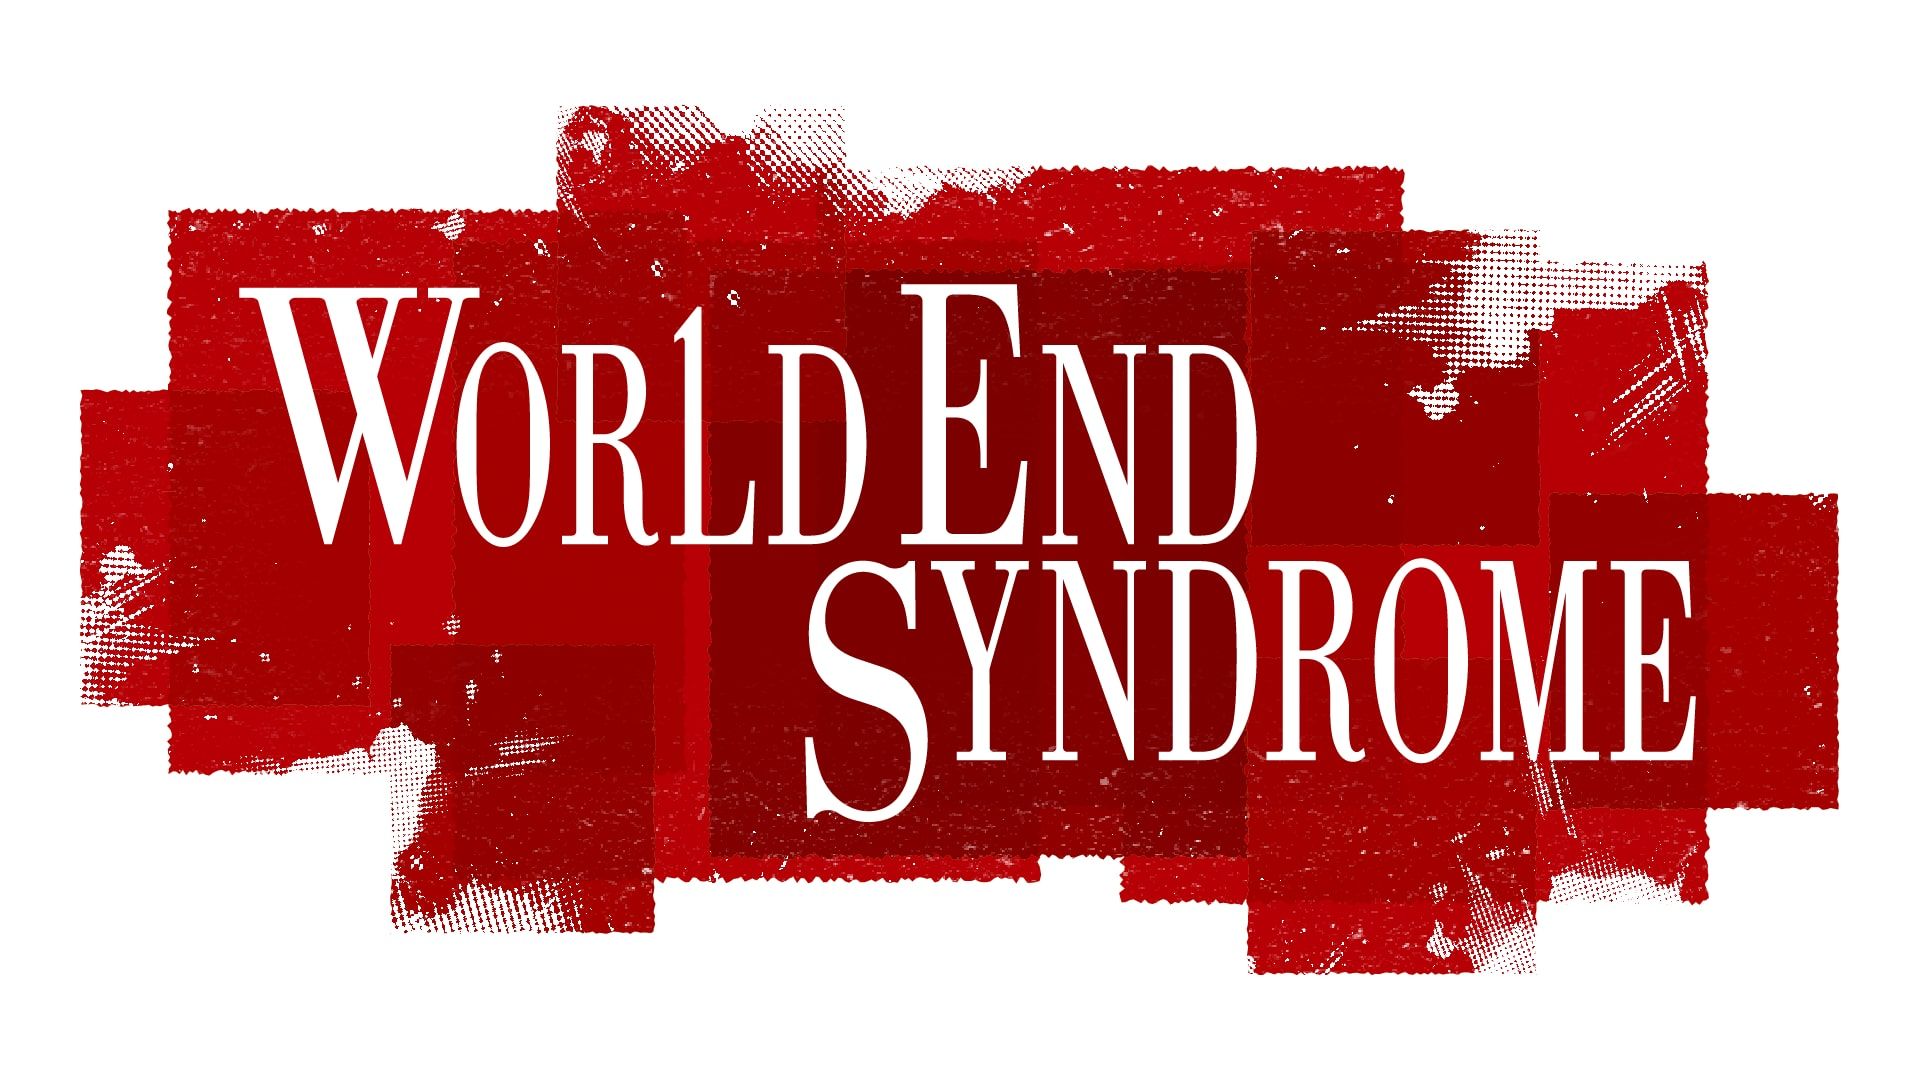 WORLDEND SYNDROME cover image